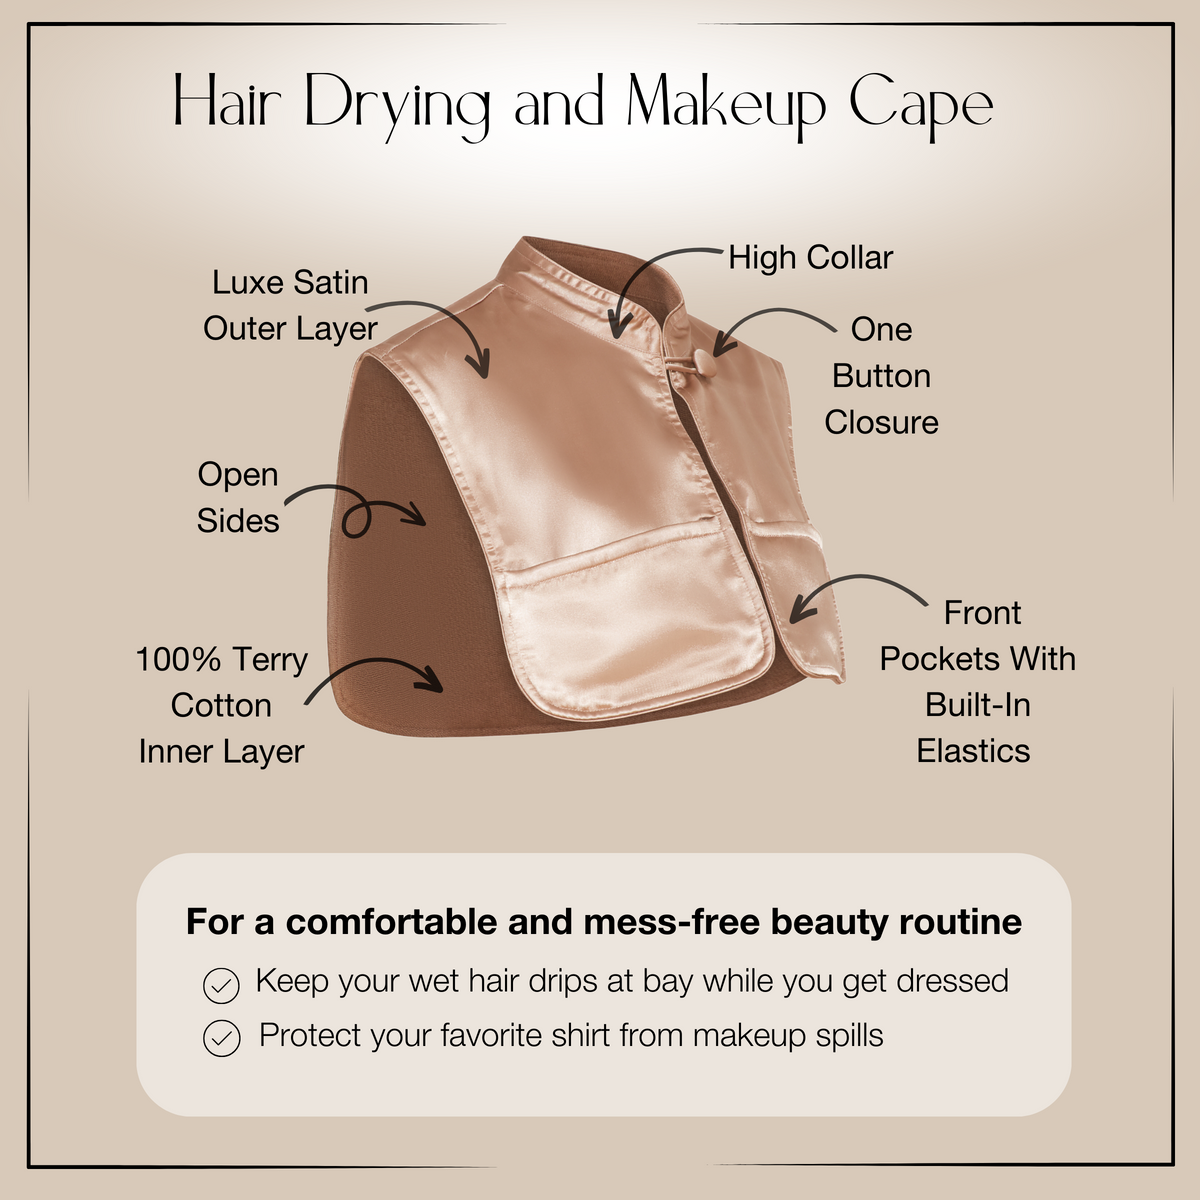 Monii Hair Drying and Makeup Cape, Champagne